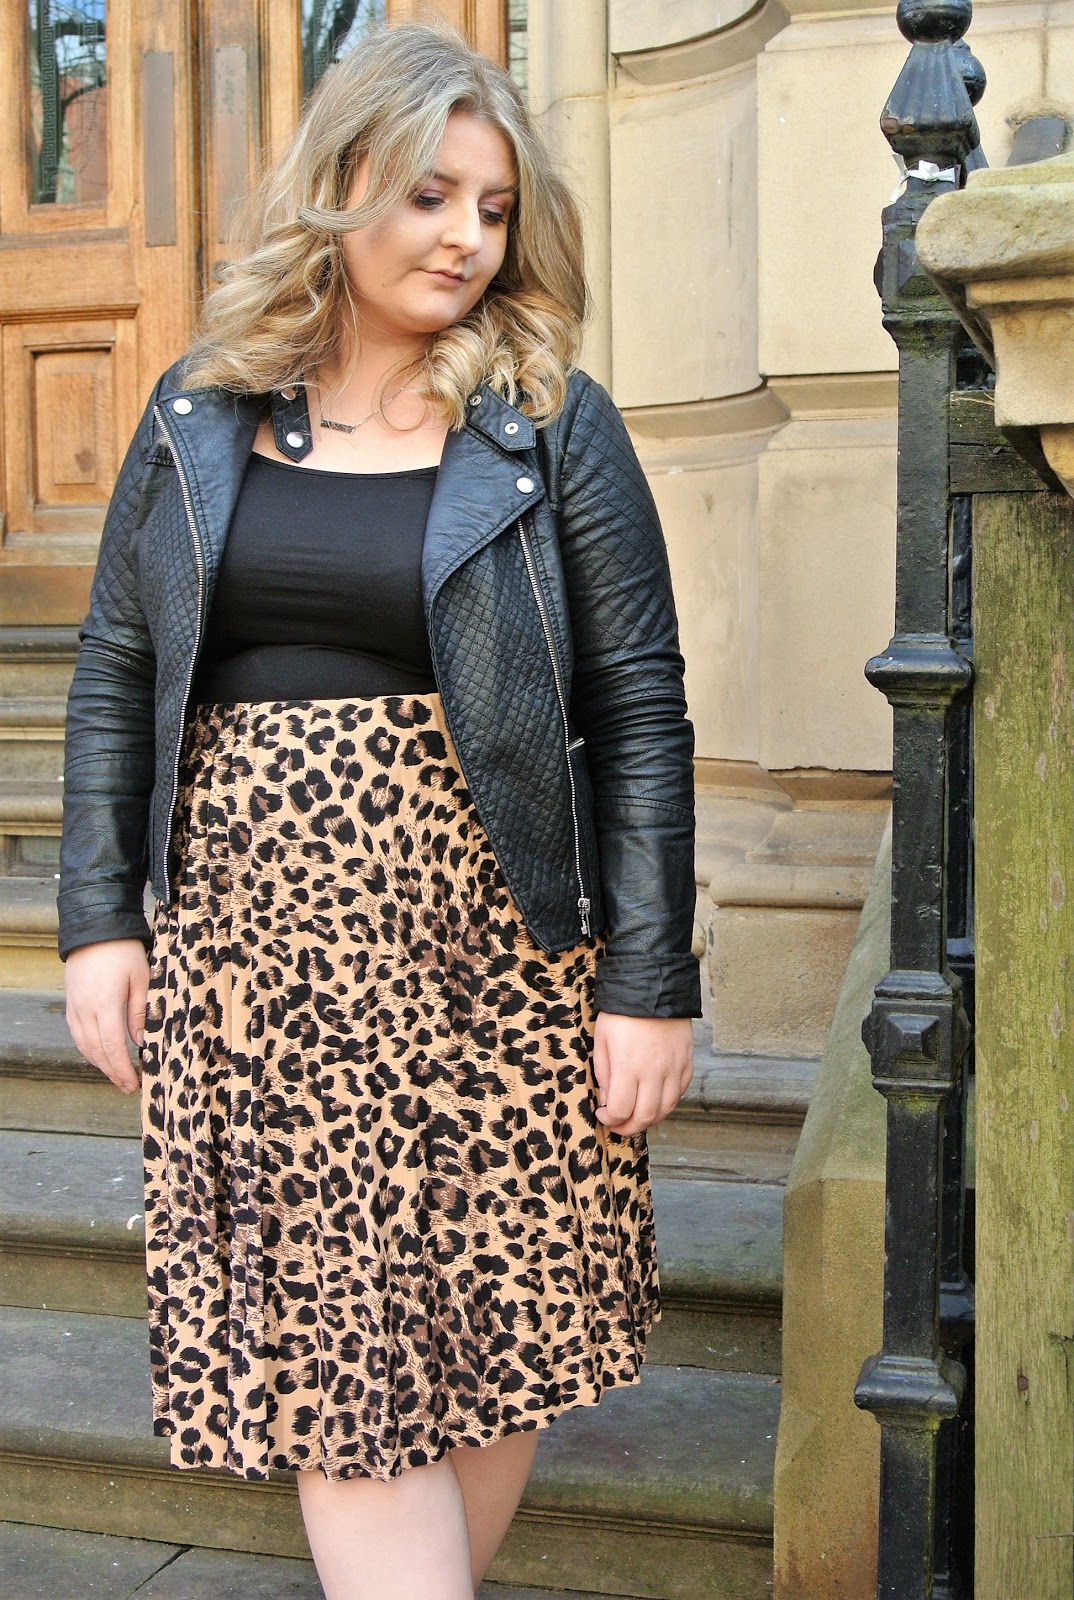 LEOPARD PRINT SKIRT - PRETTY YOUNG THING